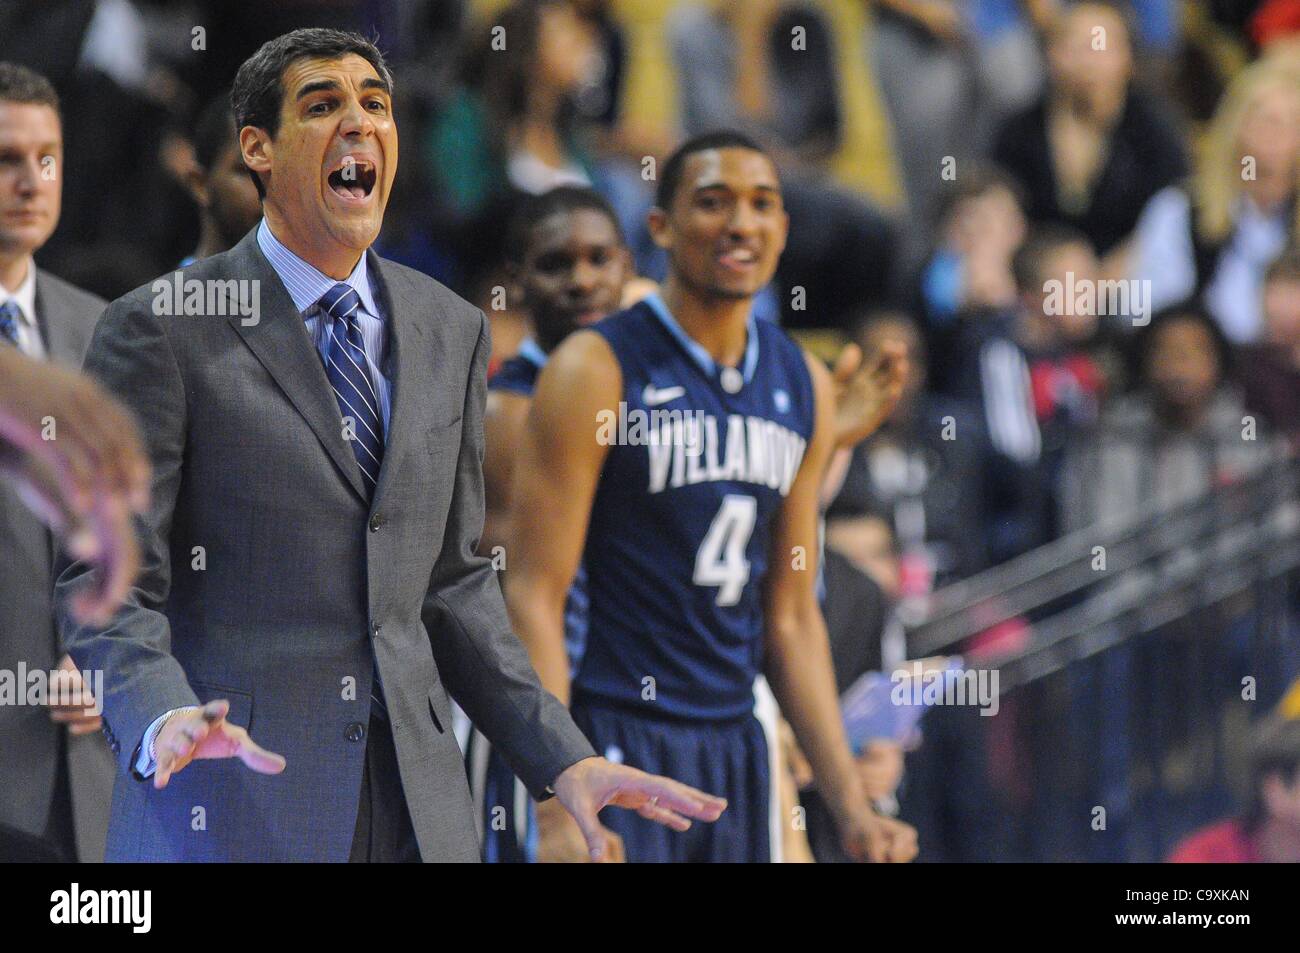 Mar. 01, 2012 - Newark, New Jersey, U.S. - Villanova Wildcats head coach Jay Wright implores his team to calm down during second half NCAA Men's Big East Basketball action between Rutgers and Villanova at the Louis Brown Athletic Center. Villanova defeated Rutgers 77-71. (Credit Image: © Will Schnee Stock Photo